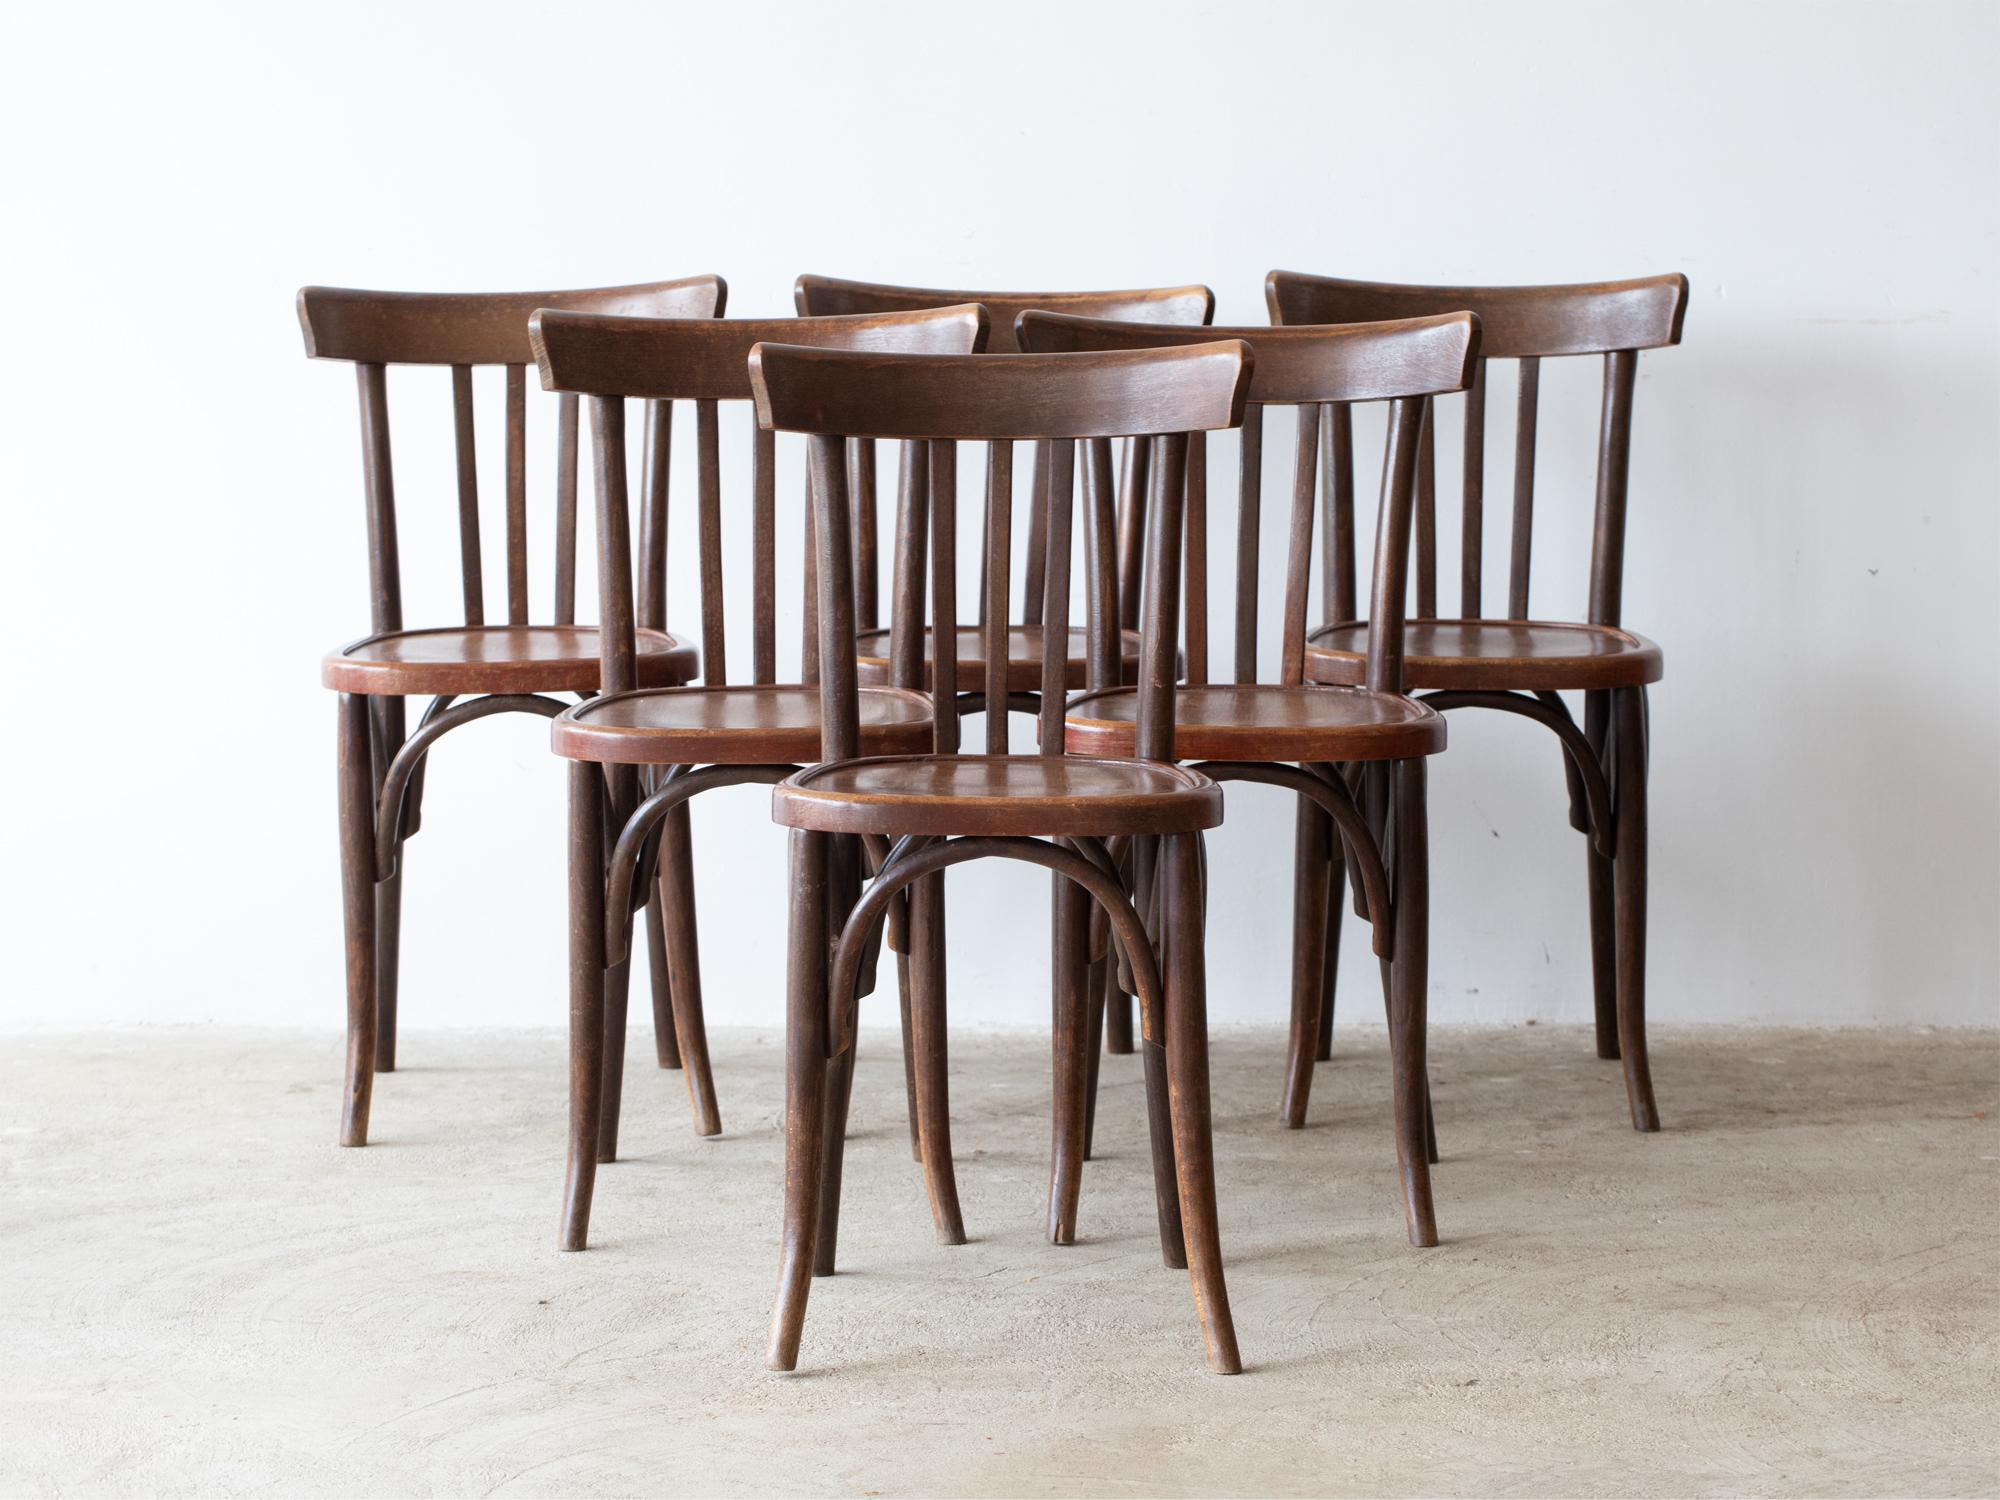 A set of six stained beech Parisian bistro chairs. French, mid 20C.

Stock ref. #2289

Two chairs retain their Raymond Coppin, Vincennes maker's plaque. 

All structurally sound and in their original well-worn finish. Cleaned and waxed in-house.